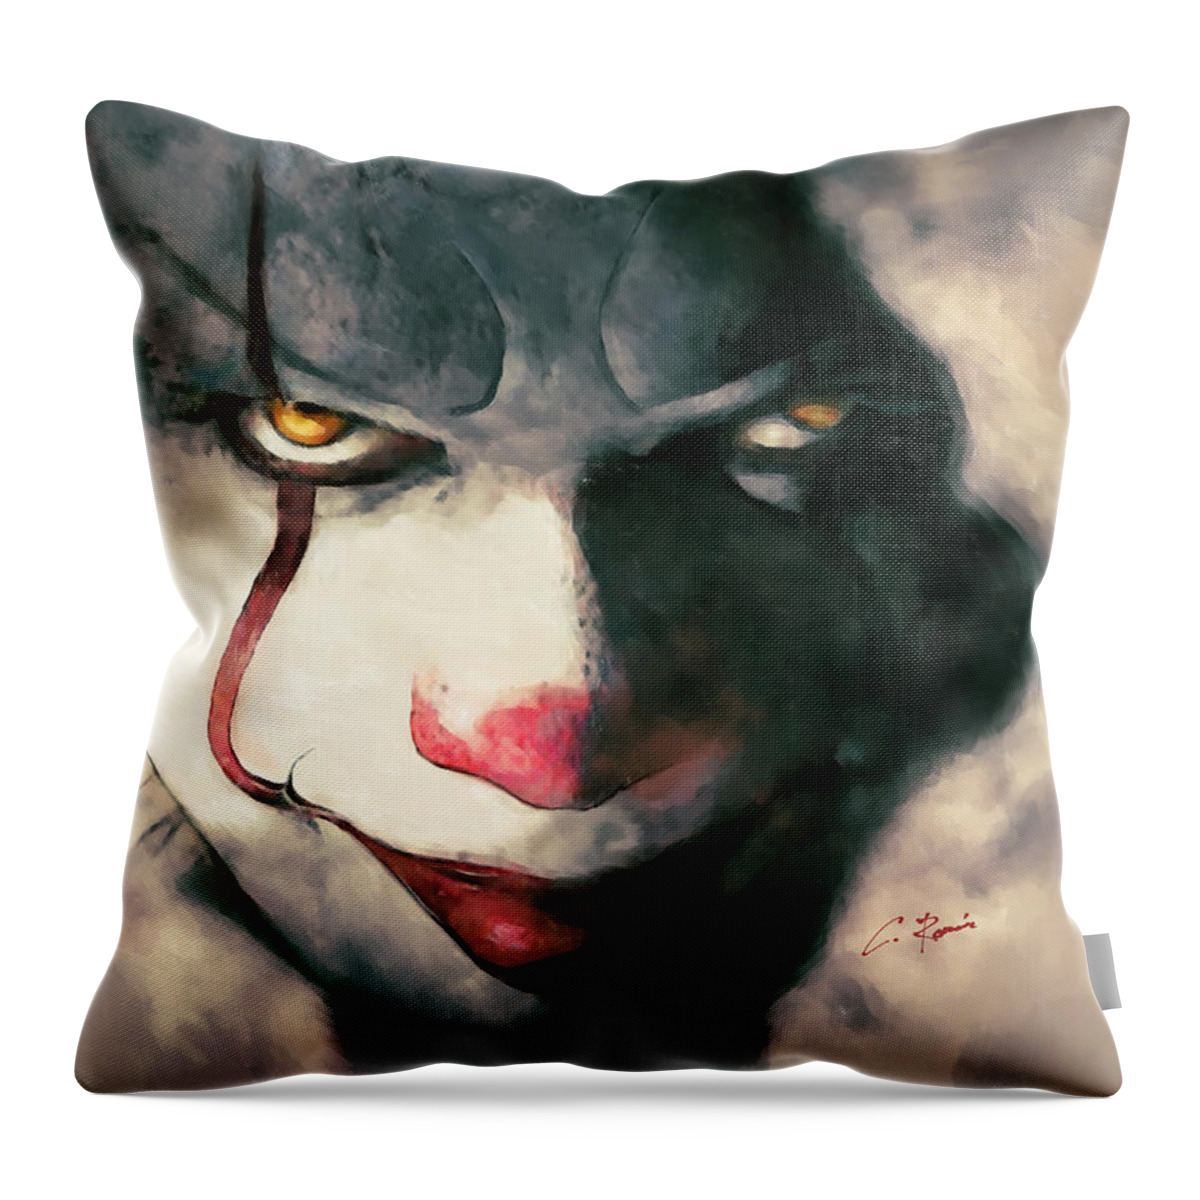 Sewer Throw Pillow featuring the digital art The Sewer Clown by Charlie Roman